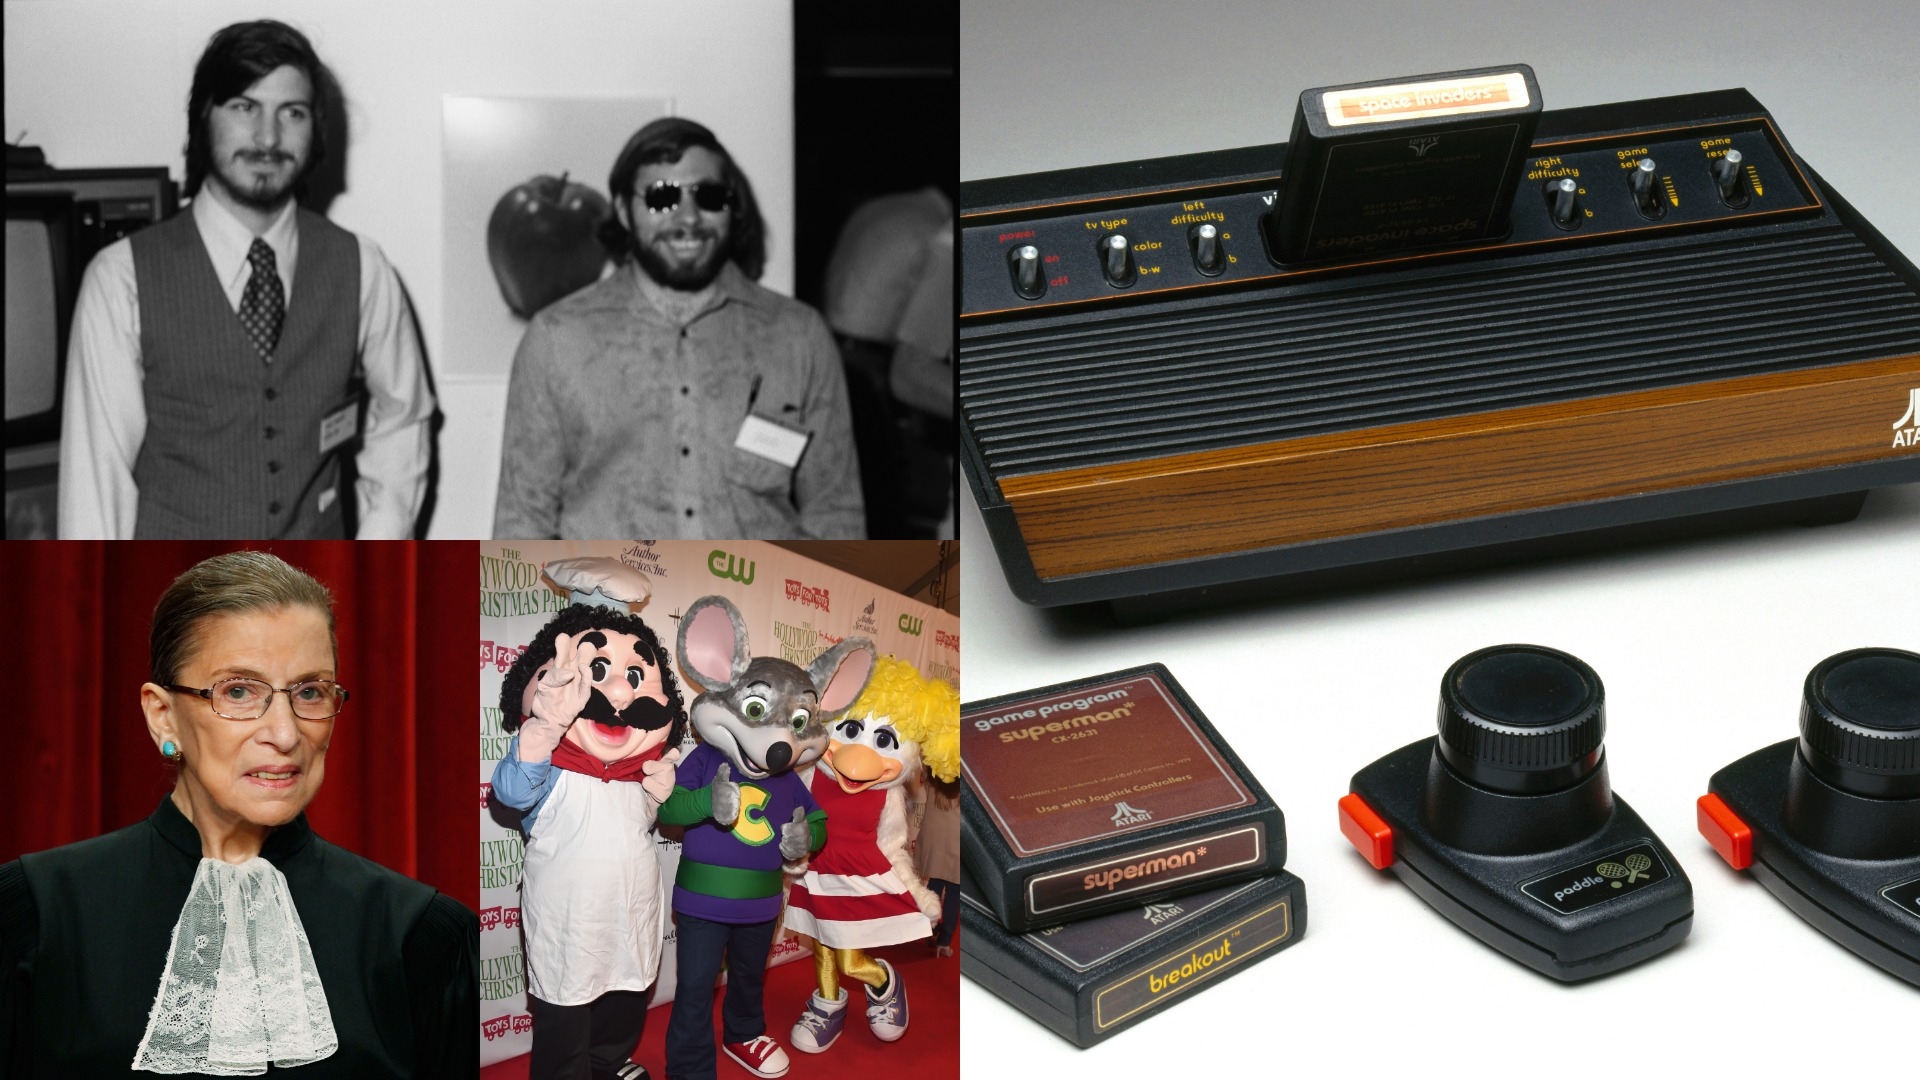 What do Steve Jobs, Ruth Bader Ginsburg, and Chuck E. Cheese have in common? This early Atari hit